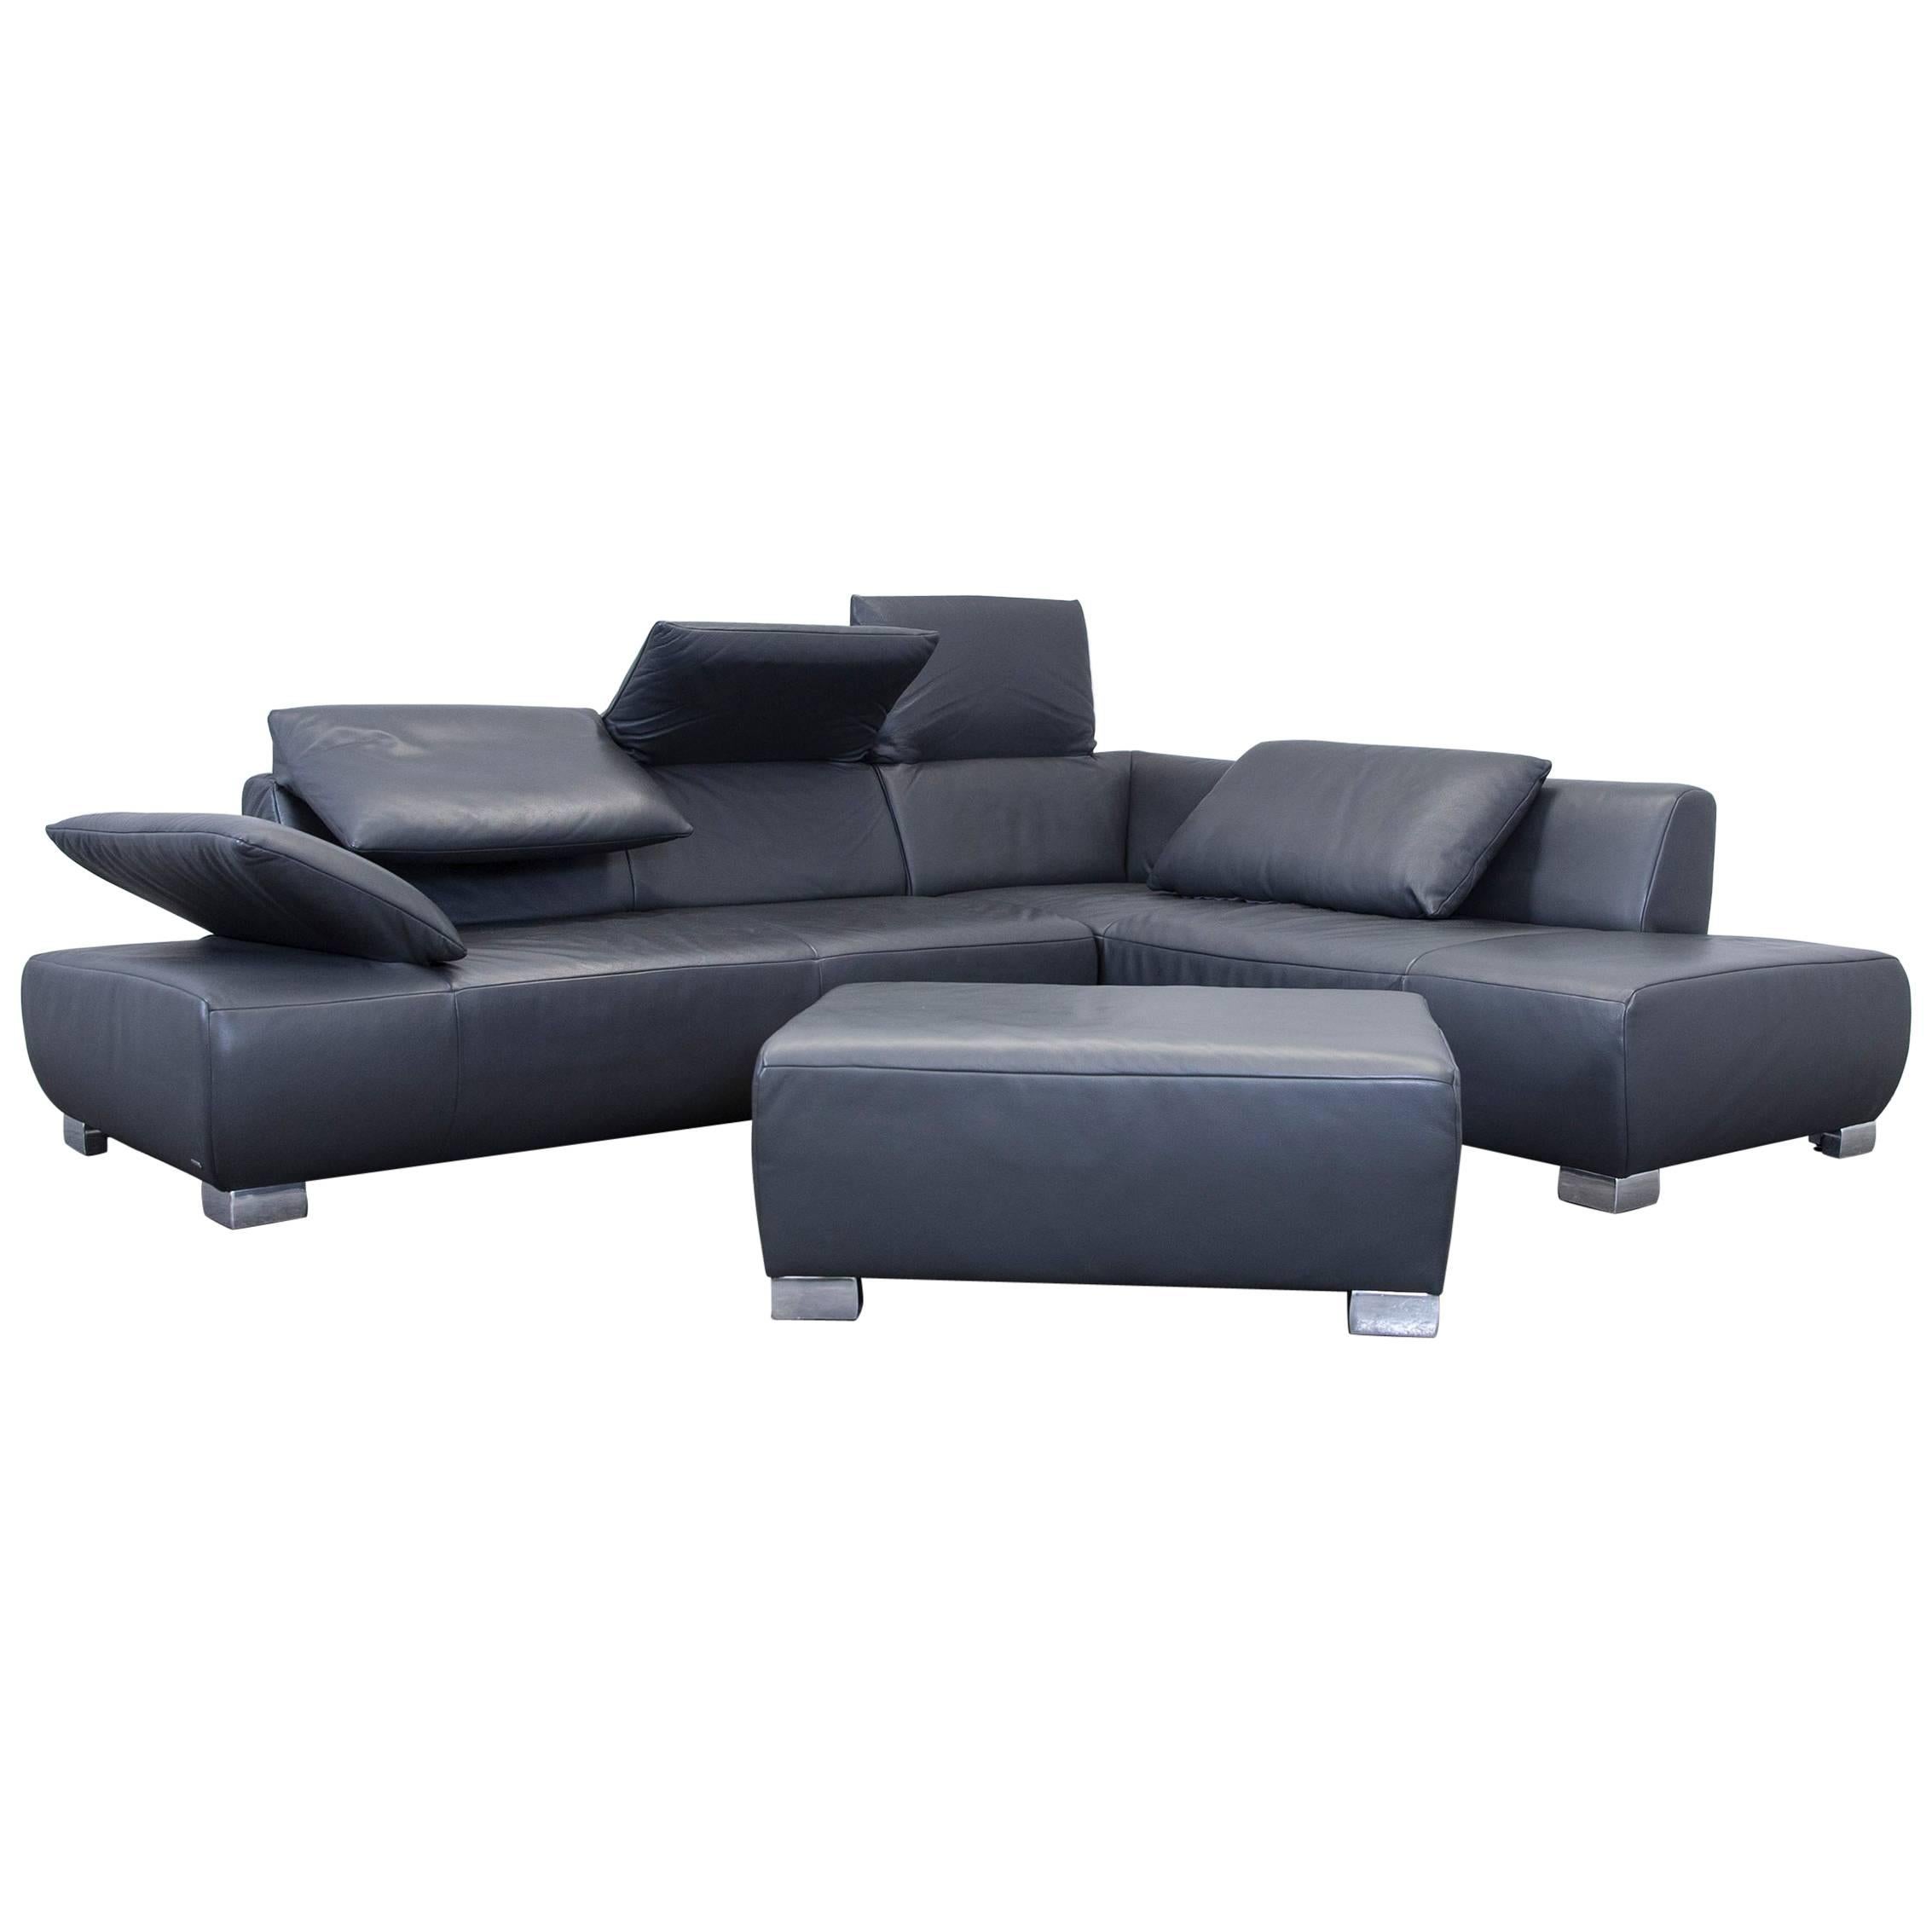 Koinor Volare Leather Corner Sofa Grey Anthracite Function Couch Foot Stool